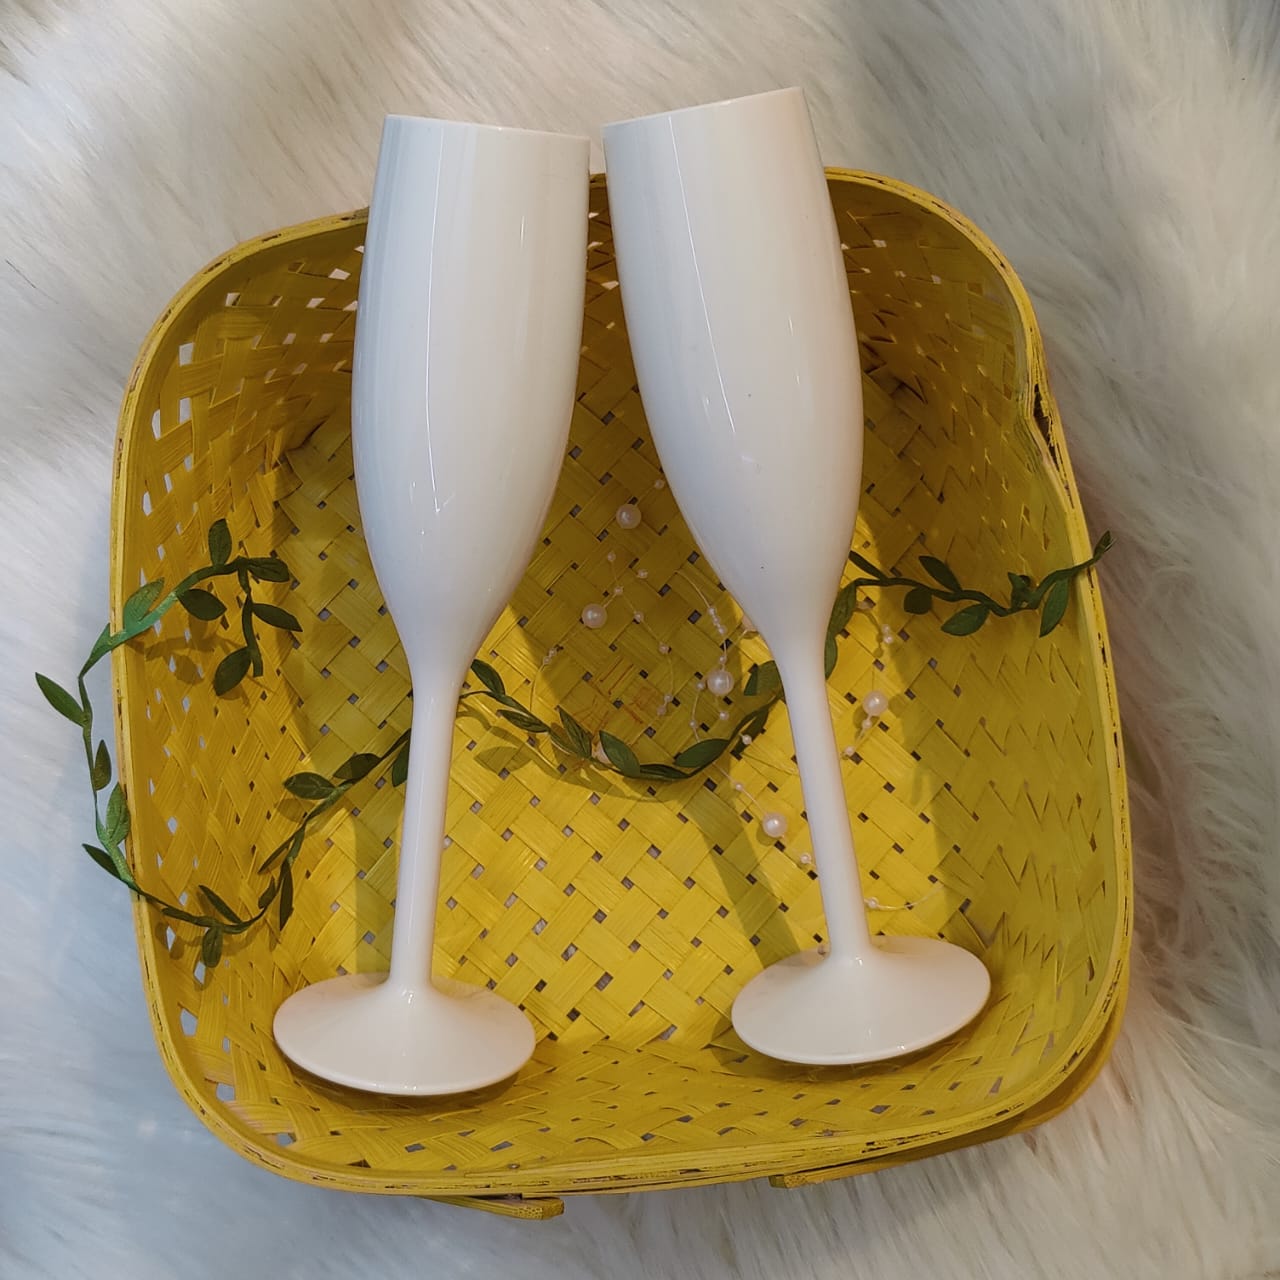 Unbreakable Champagne Flutes- Set of 2 :- Irresistible ivory white